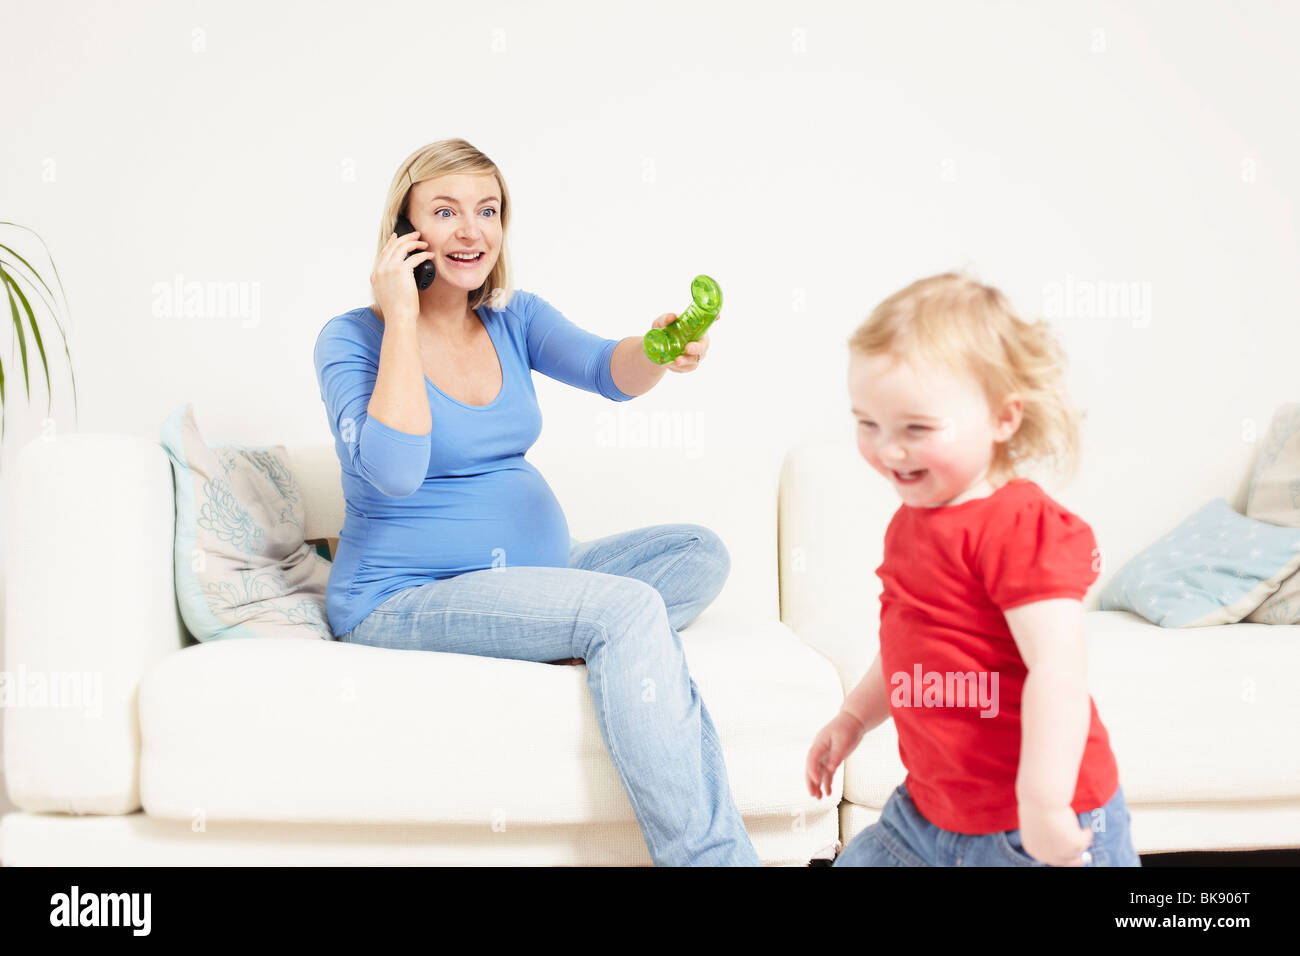 Pregnant woman on phone with toddler Banque D'Images